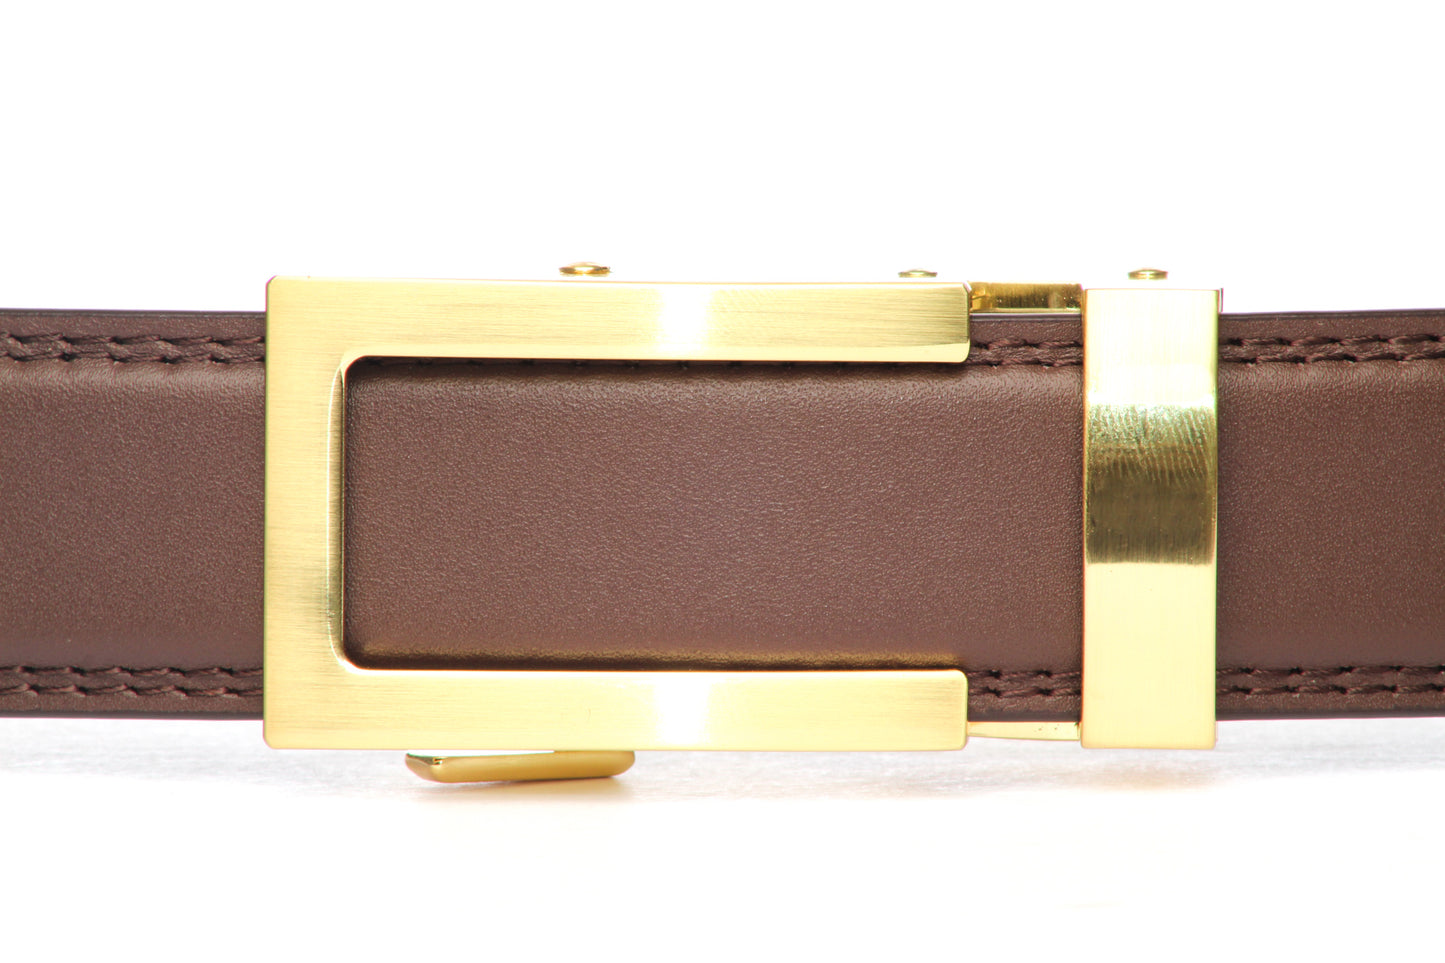 Men's traditional ratchet belt buckle in gold with a 1.25-inch width, front view.